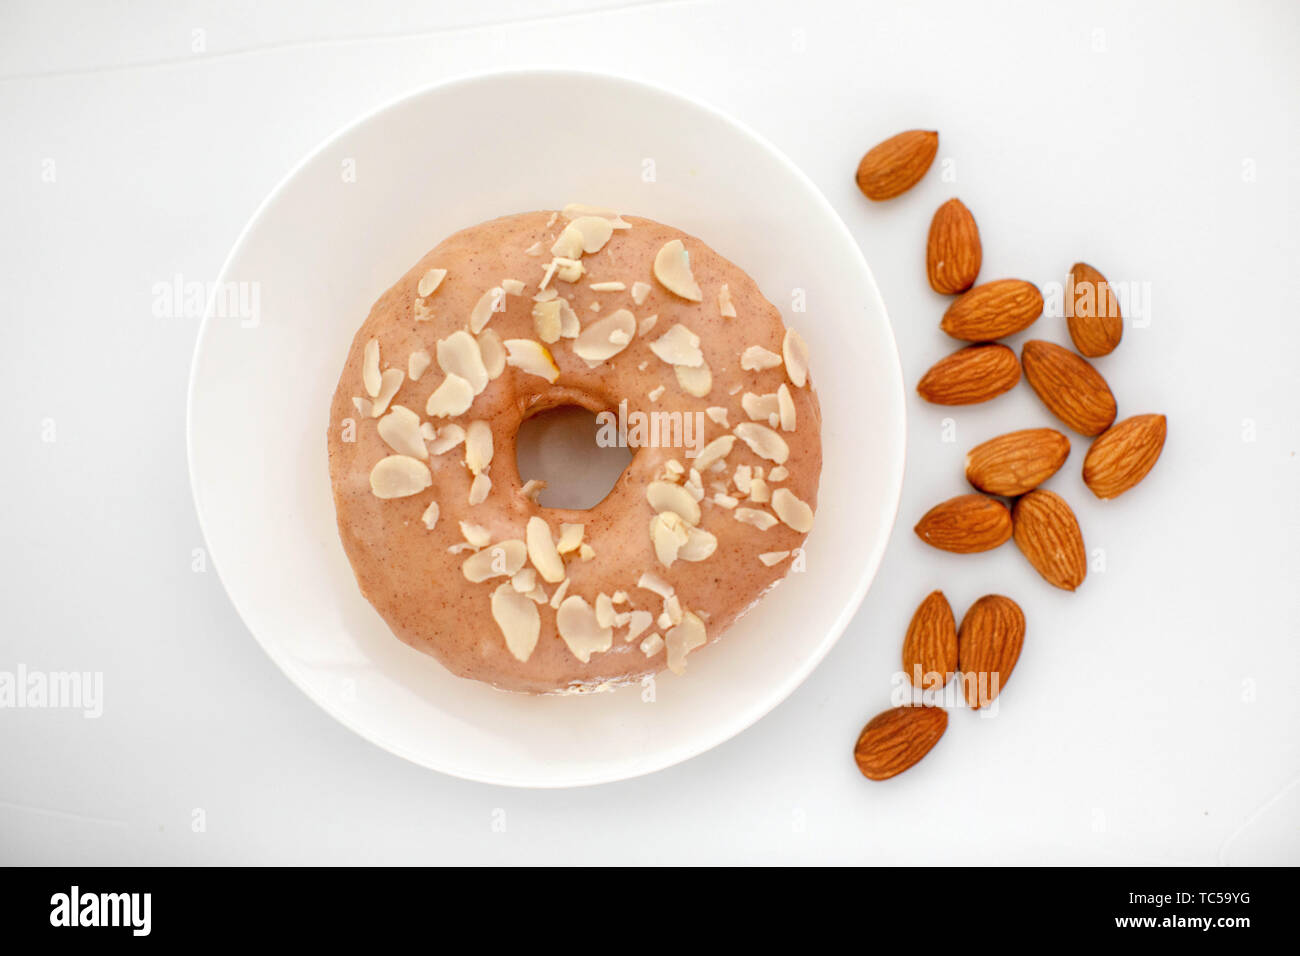 delicious donut and almond Stock Photo